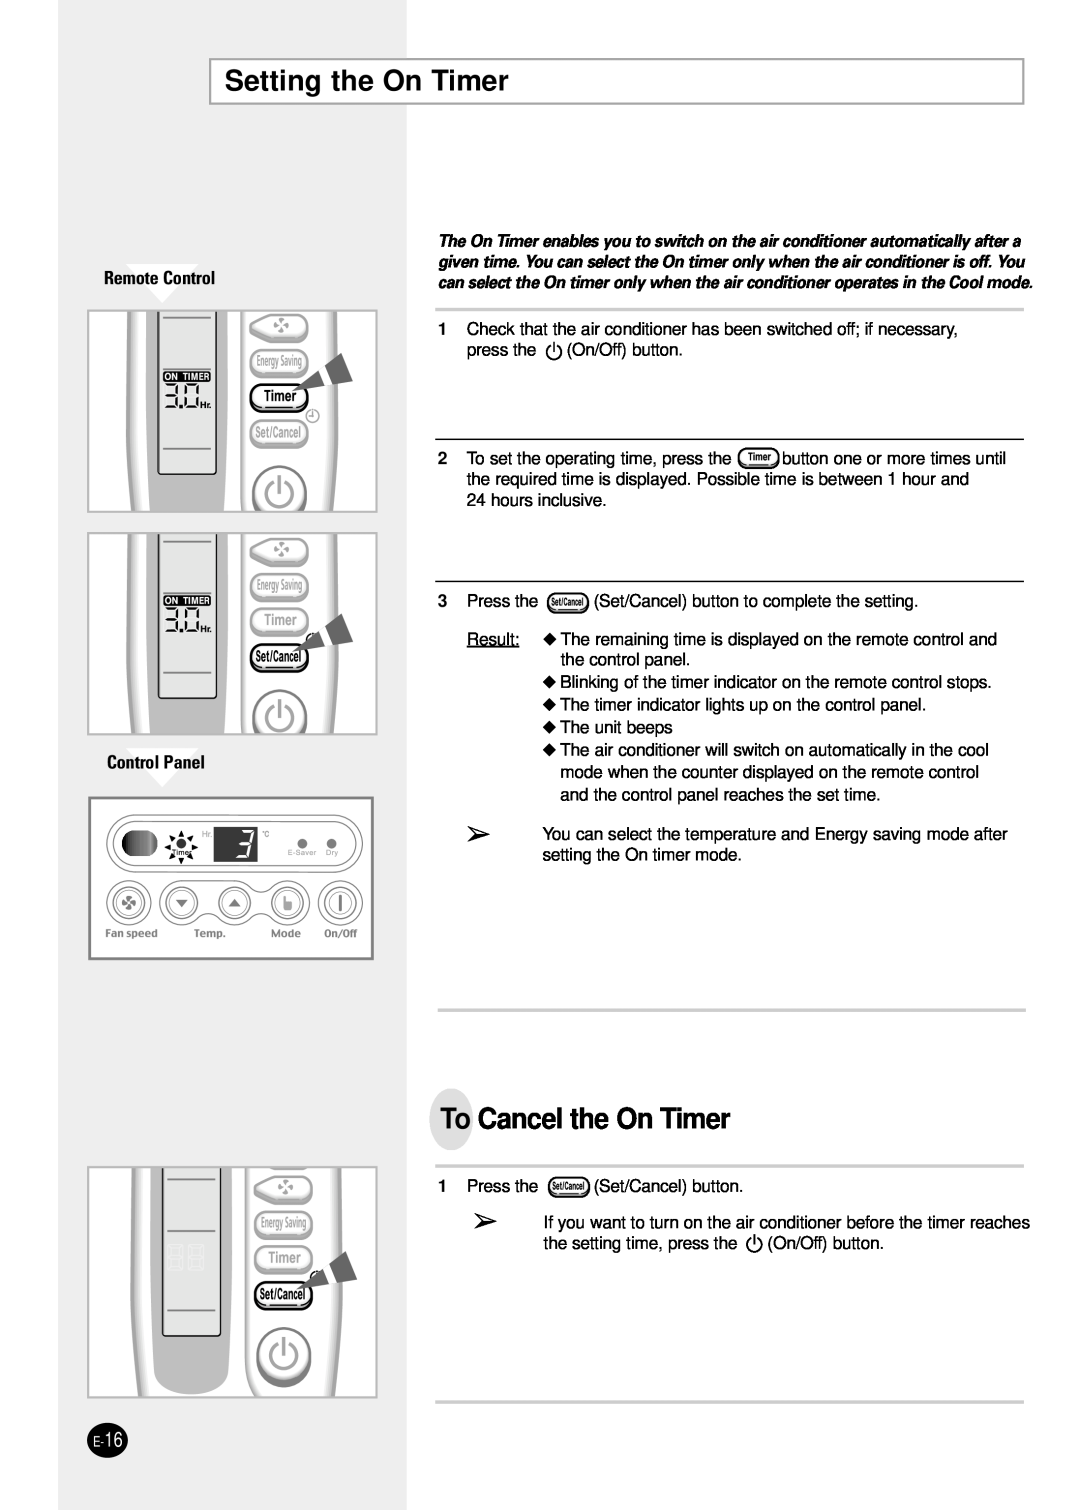 Samsung AW1291L manual Setting the On Timer, To Cancel the On Timer, Remote Control Control Panel 